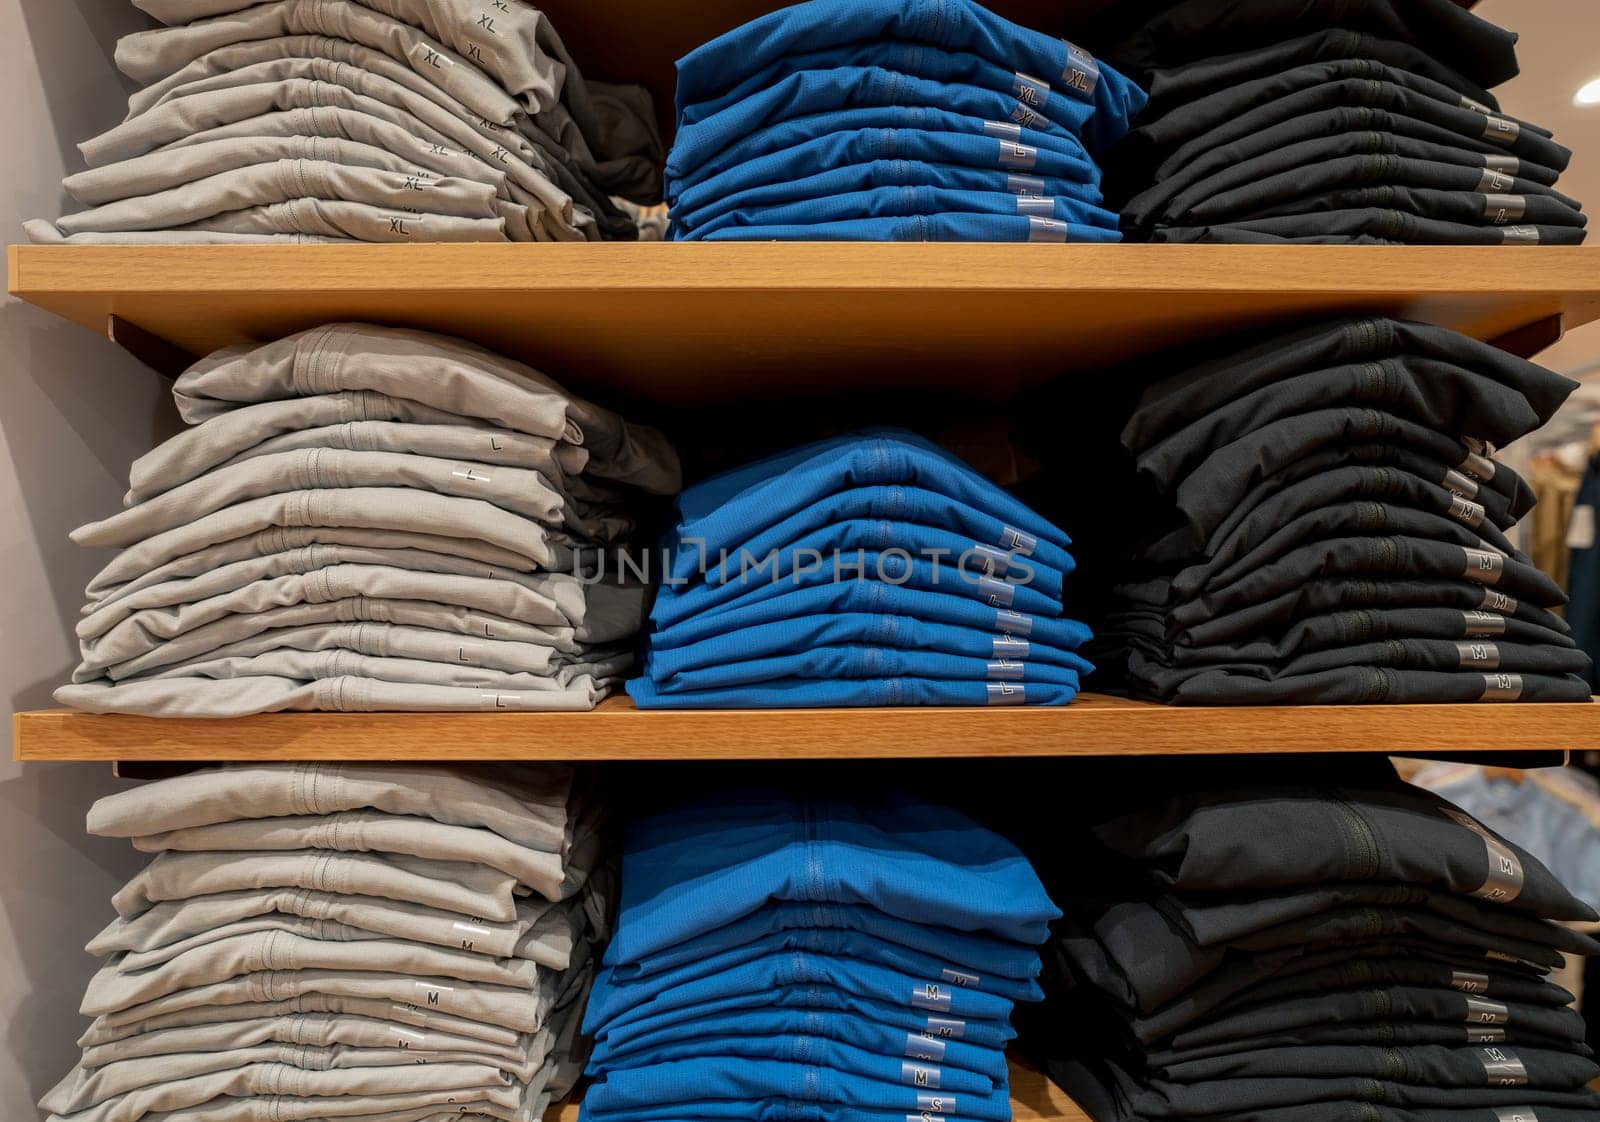 New clothes folded neatly on wooden shelf in clothing shop for sale. Fashion retail shop inside shopping mall. Trendy apparel display. New clothes showcased on wooden shelves in fashion Retail shop.